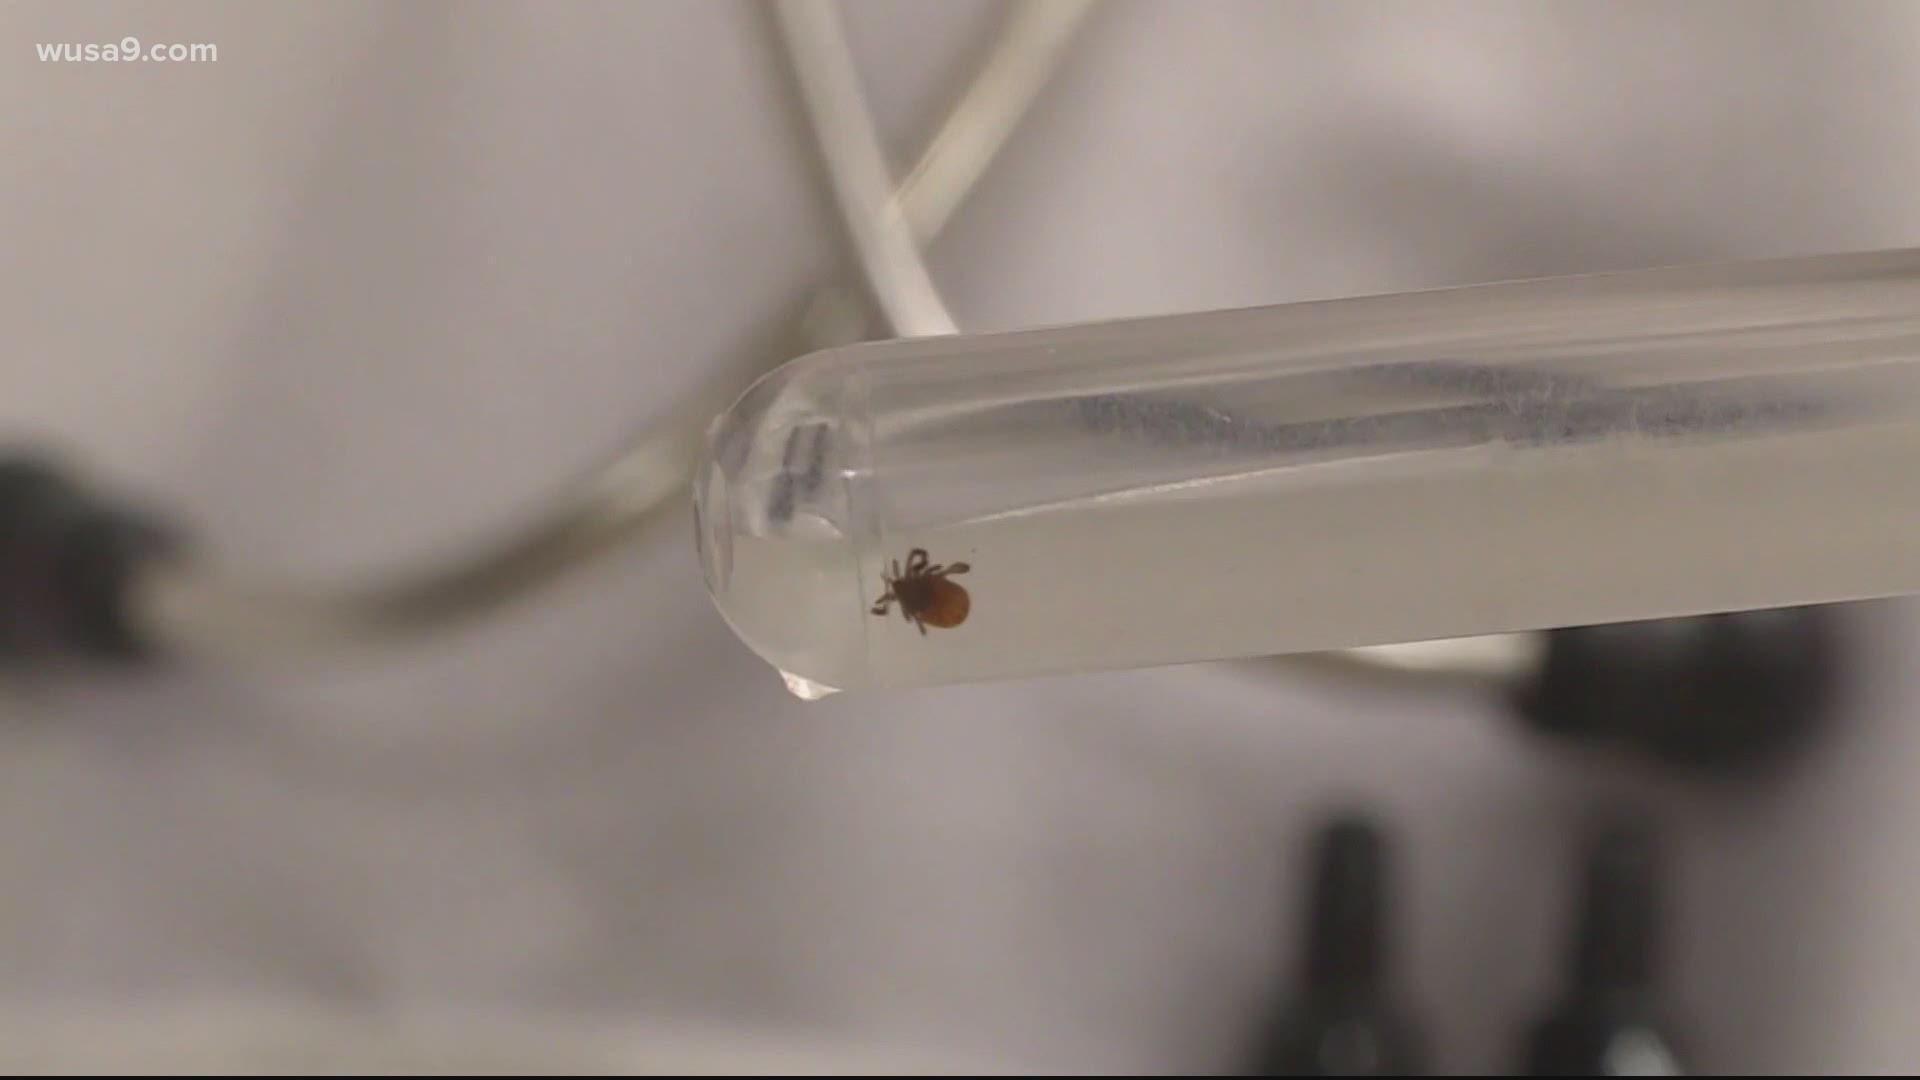 Experts are concerned because ticks carry Lyme disease.